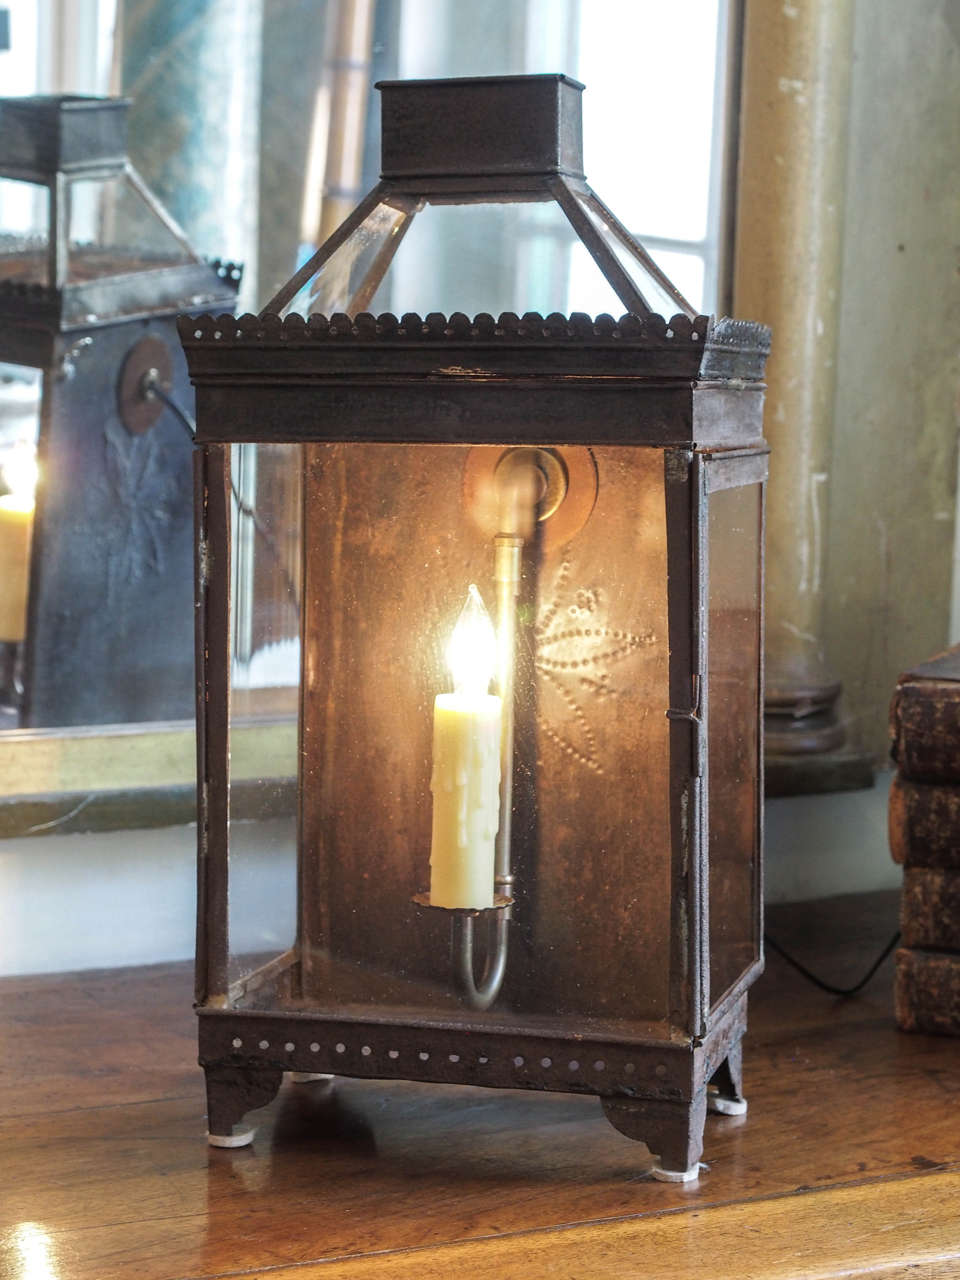 This handsome 19th century French lantern has a wonderful patina and the 